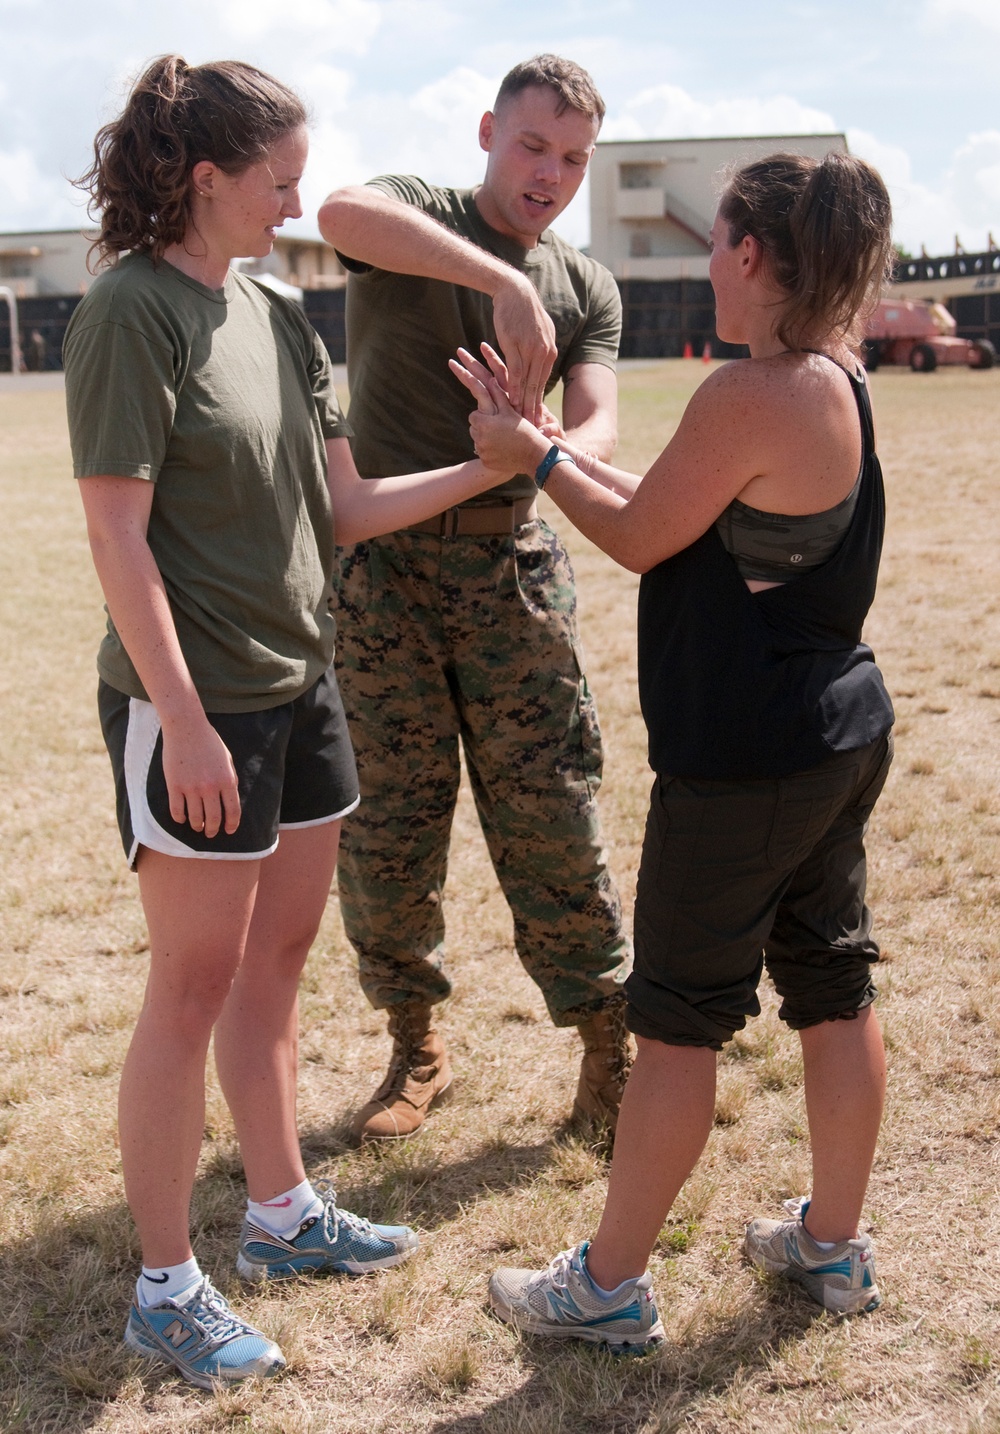 America’s Battalion spouses get a taste of the Corps